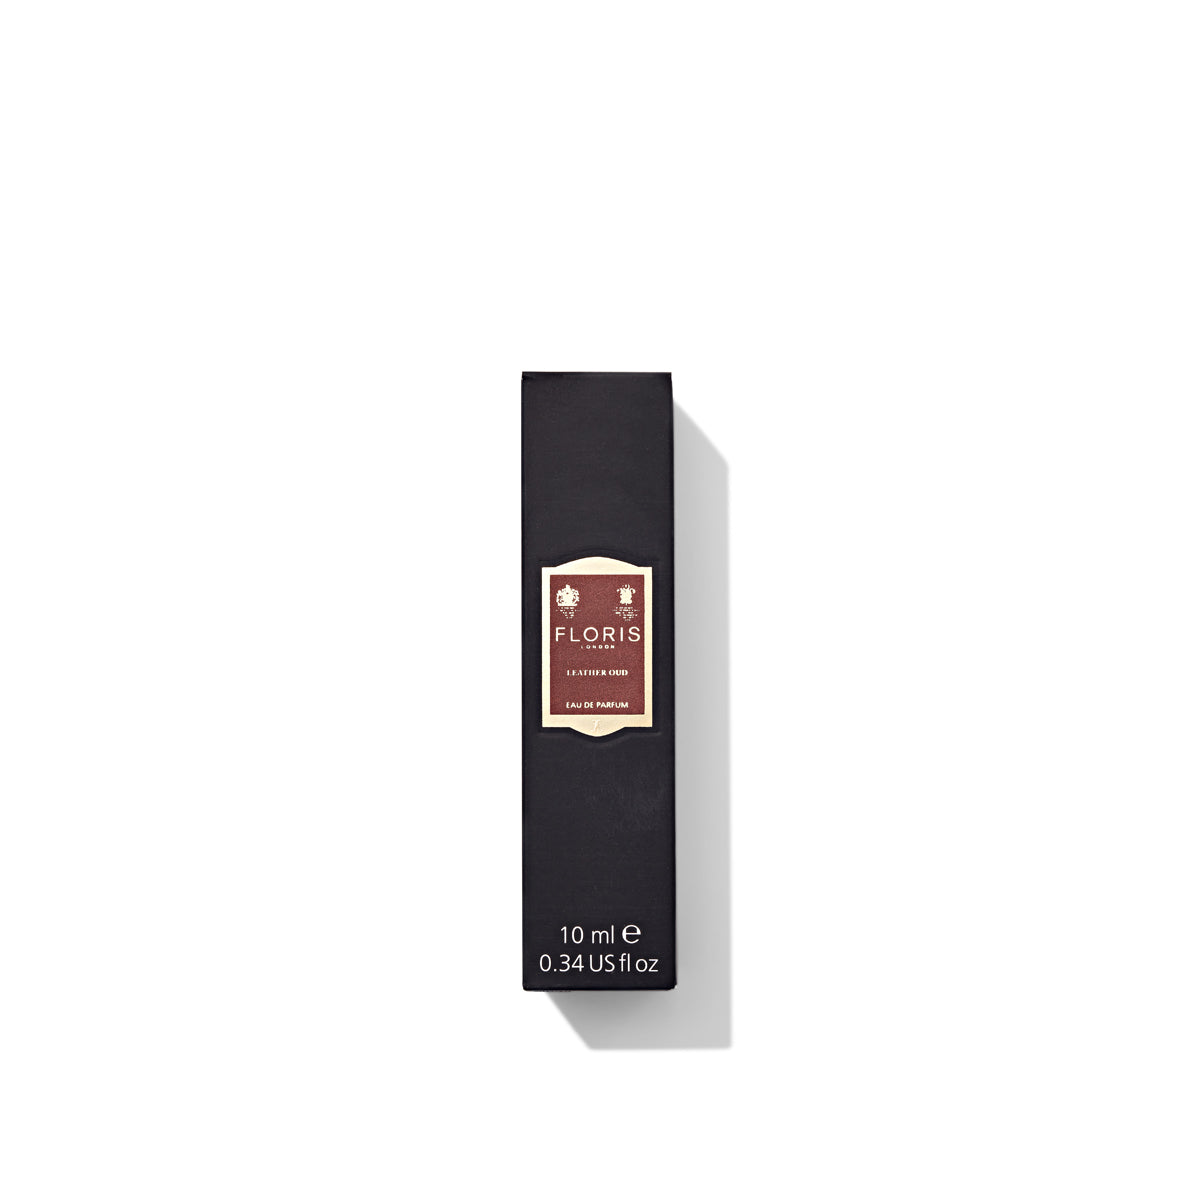 10ml black box with red Leather Oud label